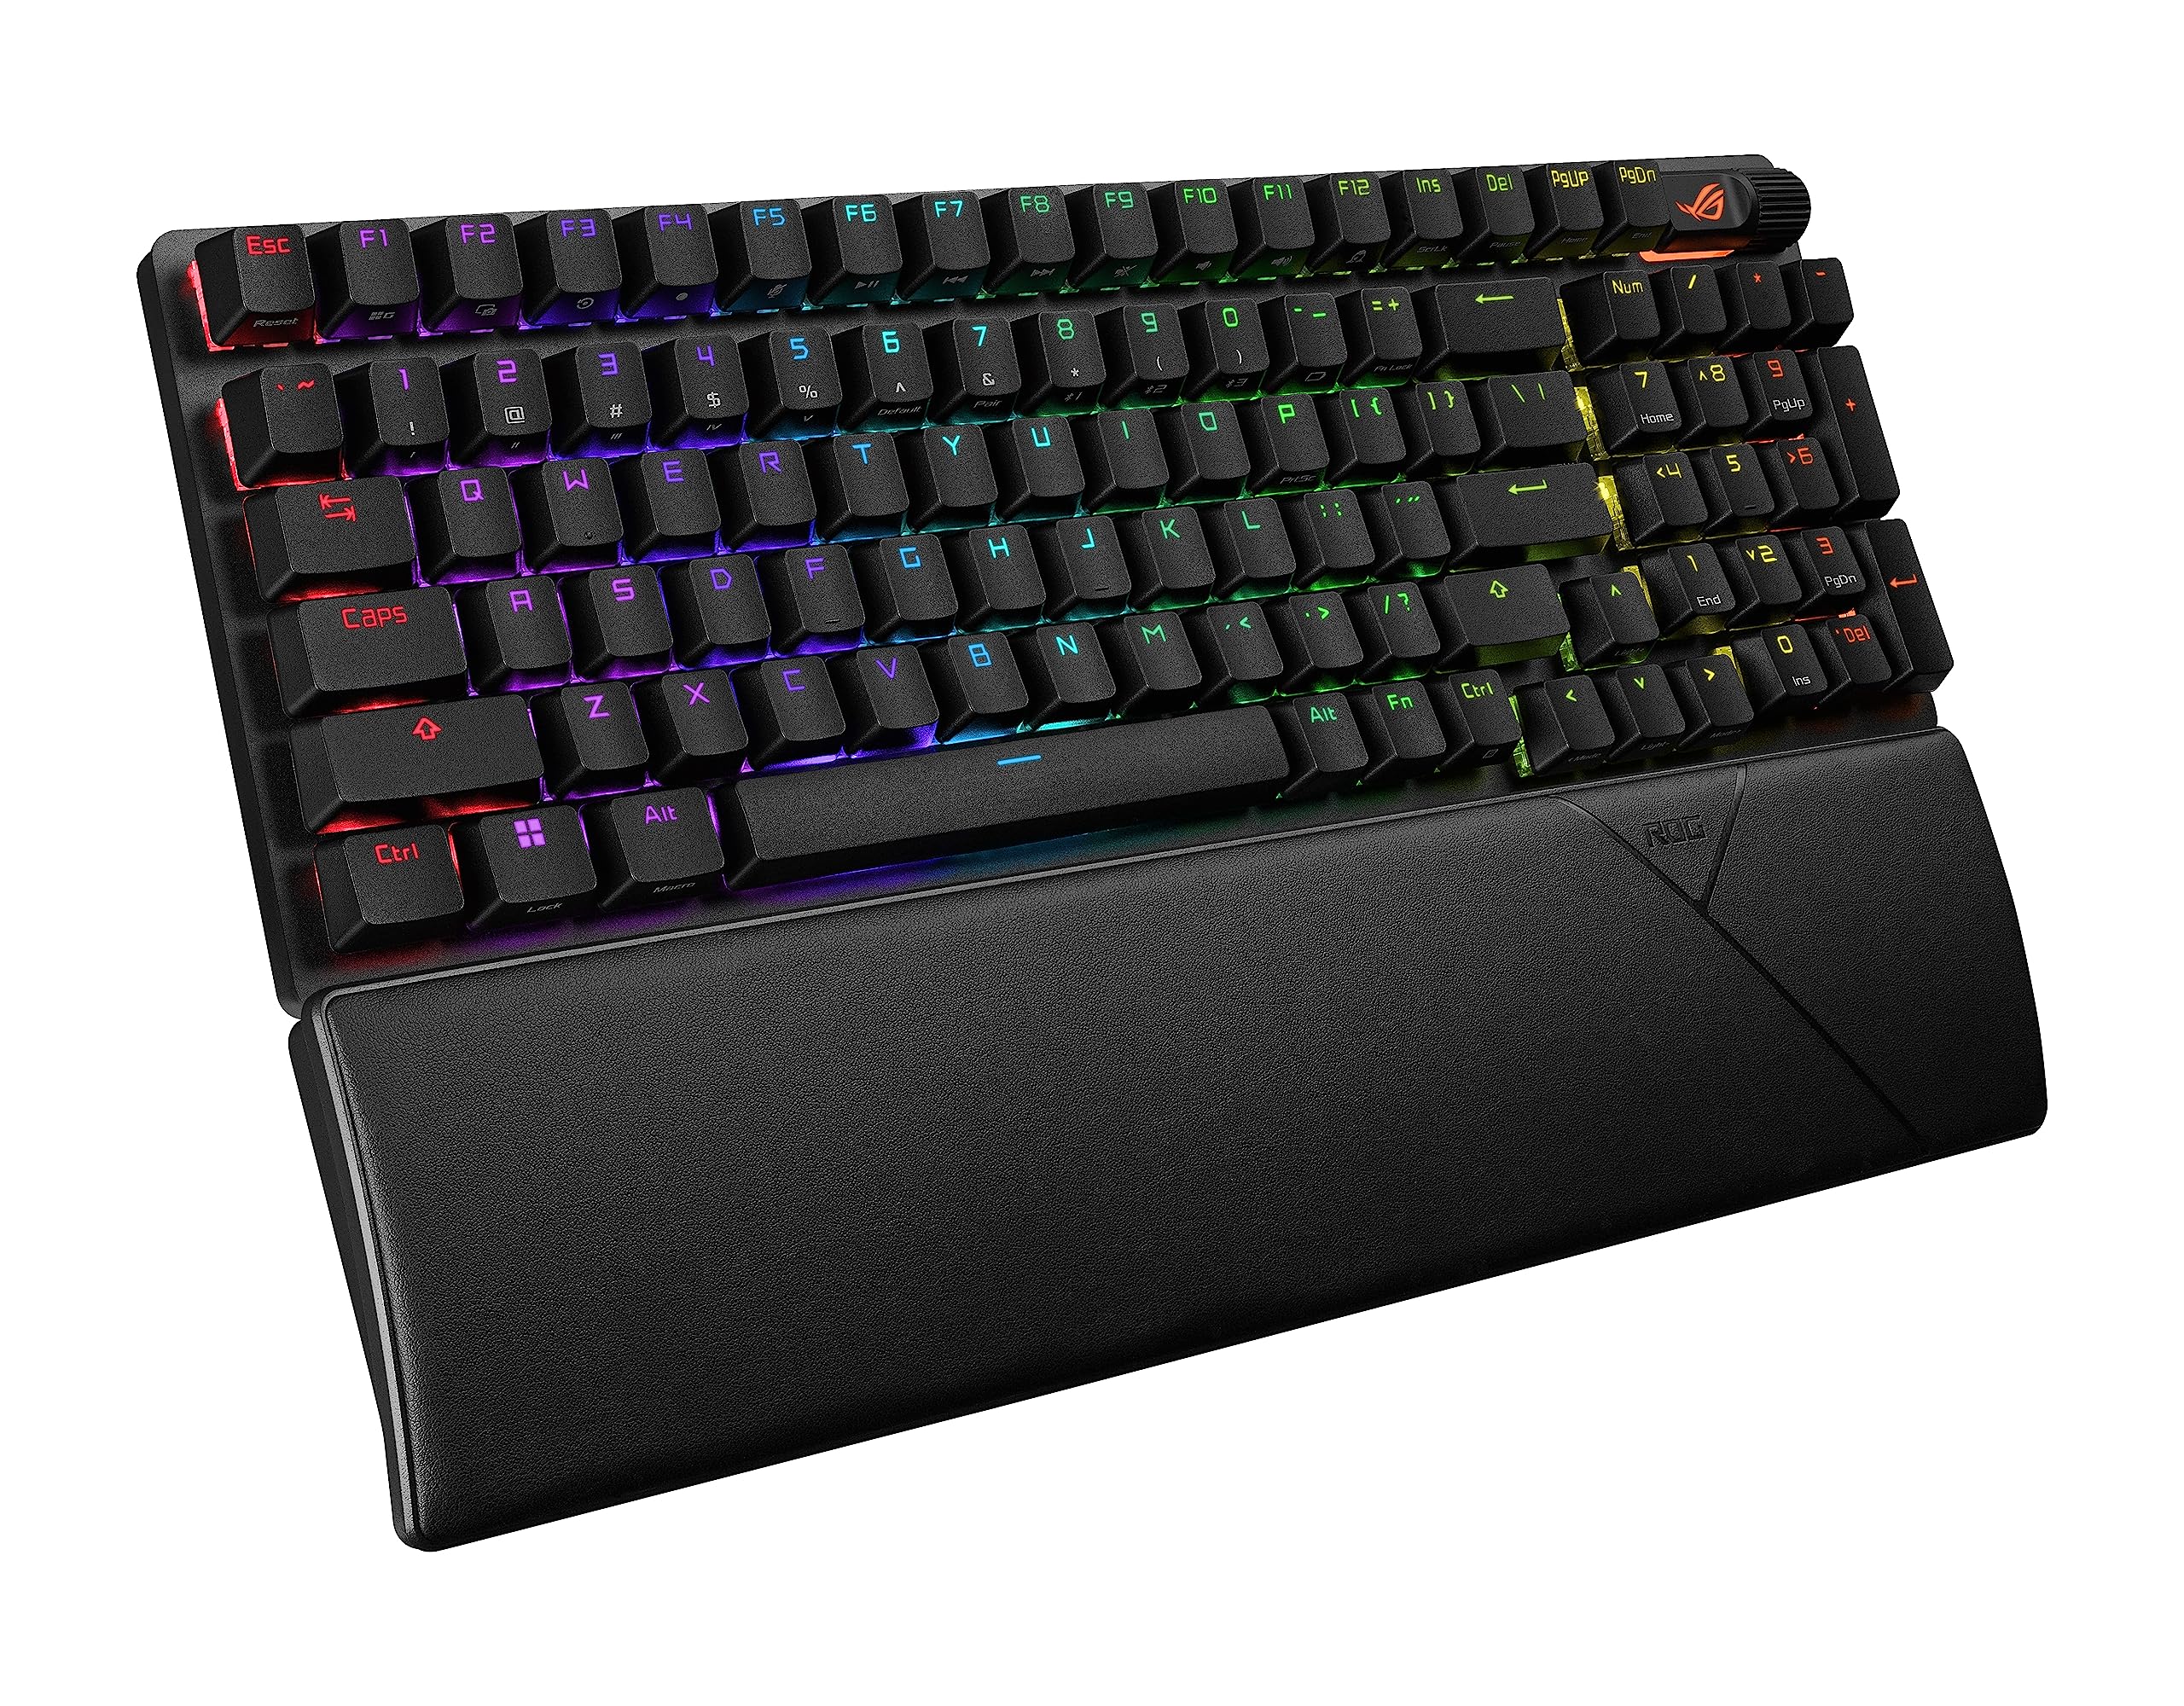 ASUS ROG Strix Scope II 96 Wireless Gaming Keyboard, Tri-Mode Connection, Dampening Foam & Switch-Dampening Pads, Hot-Swappable Pre-lubed ROG NX Storm Switches, PBT Keycaps, RGB-Black